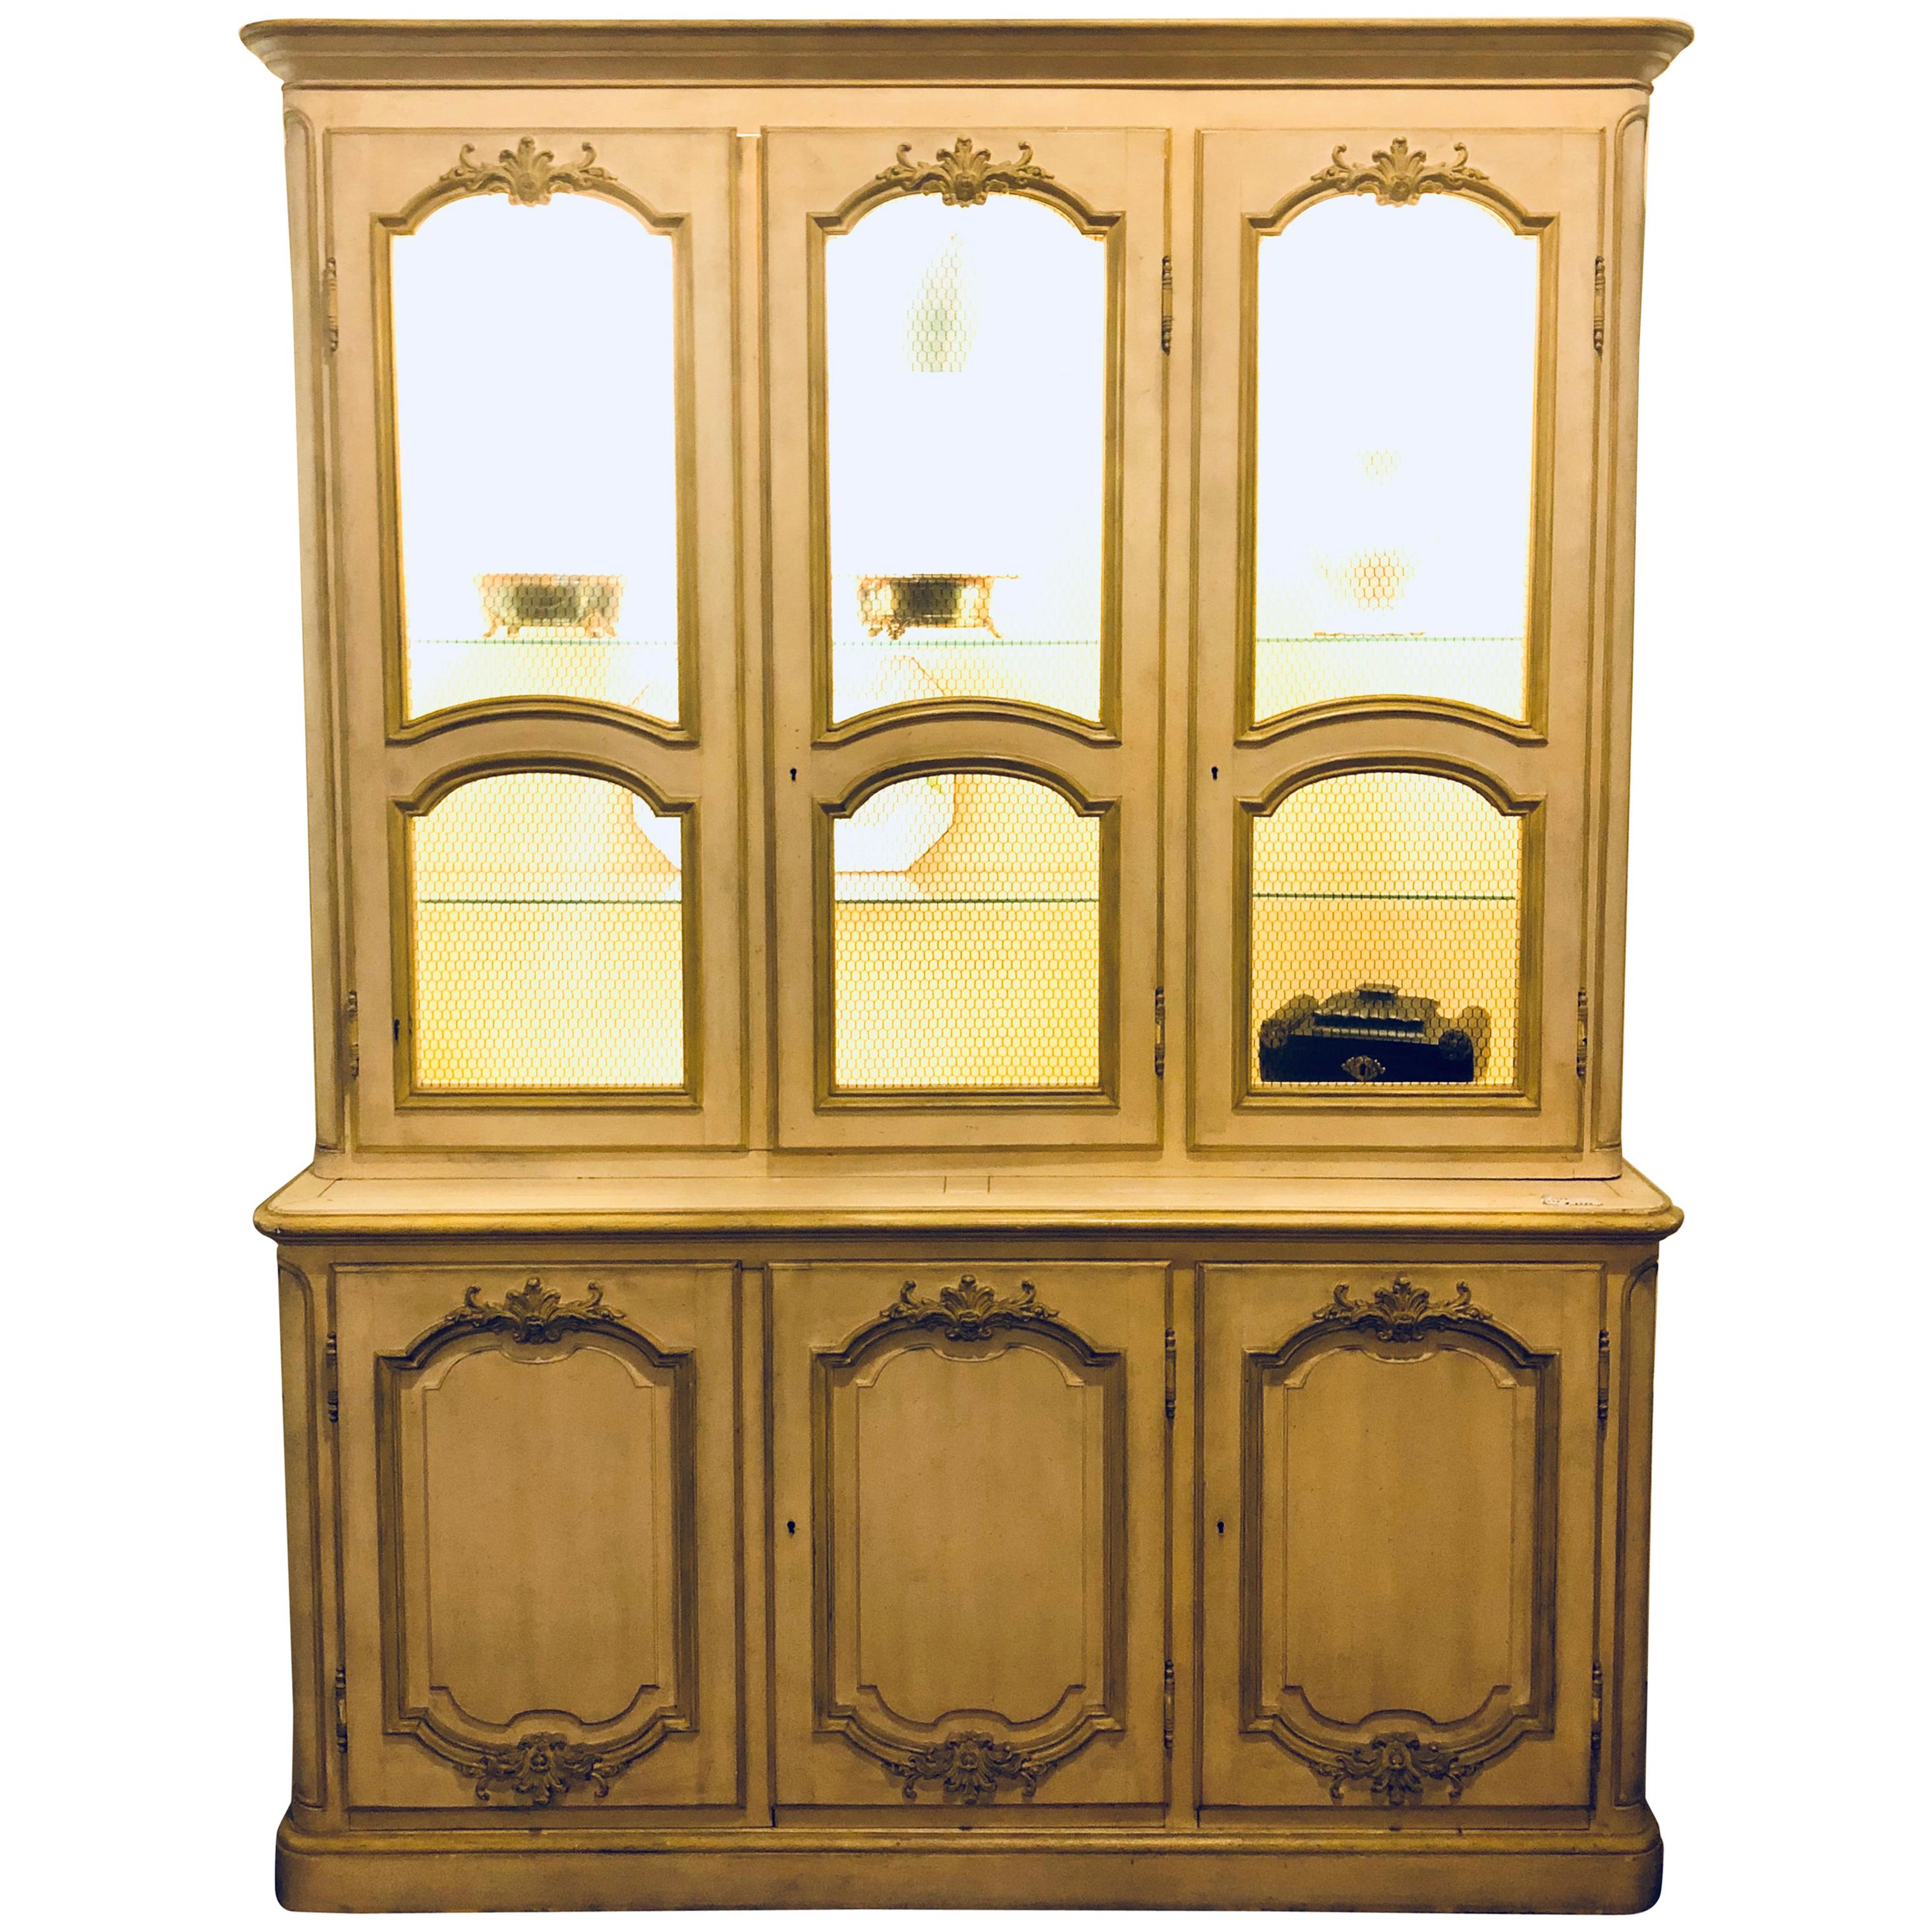 A custom quality Hollywood Regency baker cream and gilt distressed china cabinet oak lined. This fine distressed two-piece breakfront china cabinet is certain to light up any room in the home or office. On sale.